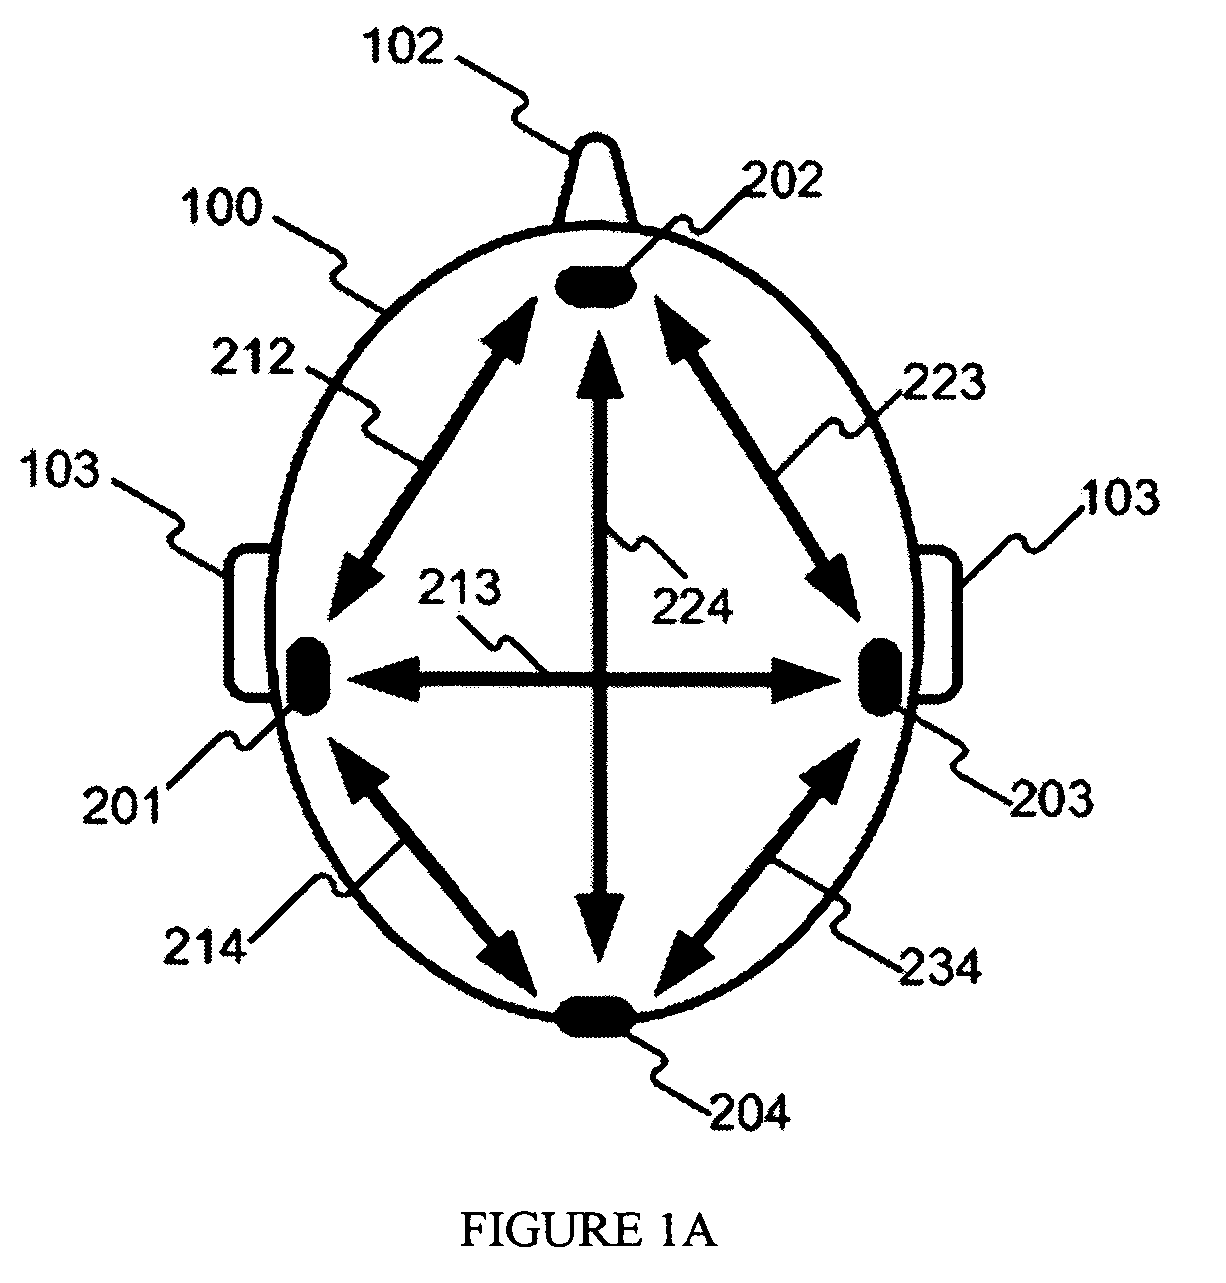 Galvanic vestibular stimulation system and method of use for simulation, directional cueing, and alleviating motion-related sickness